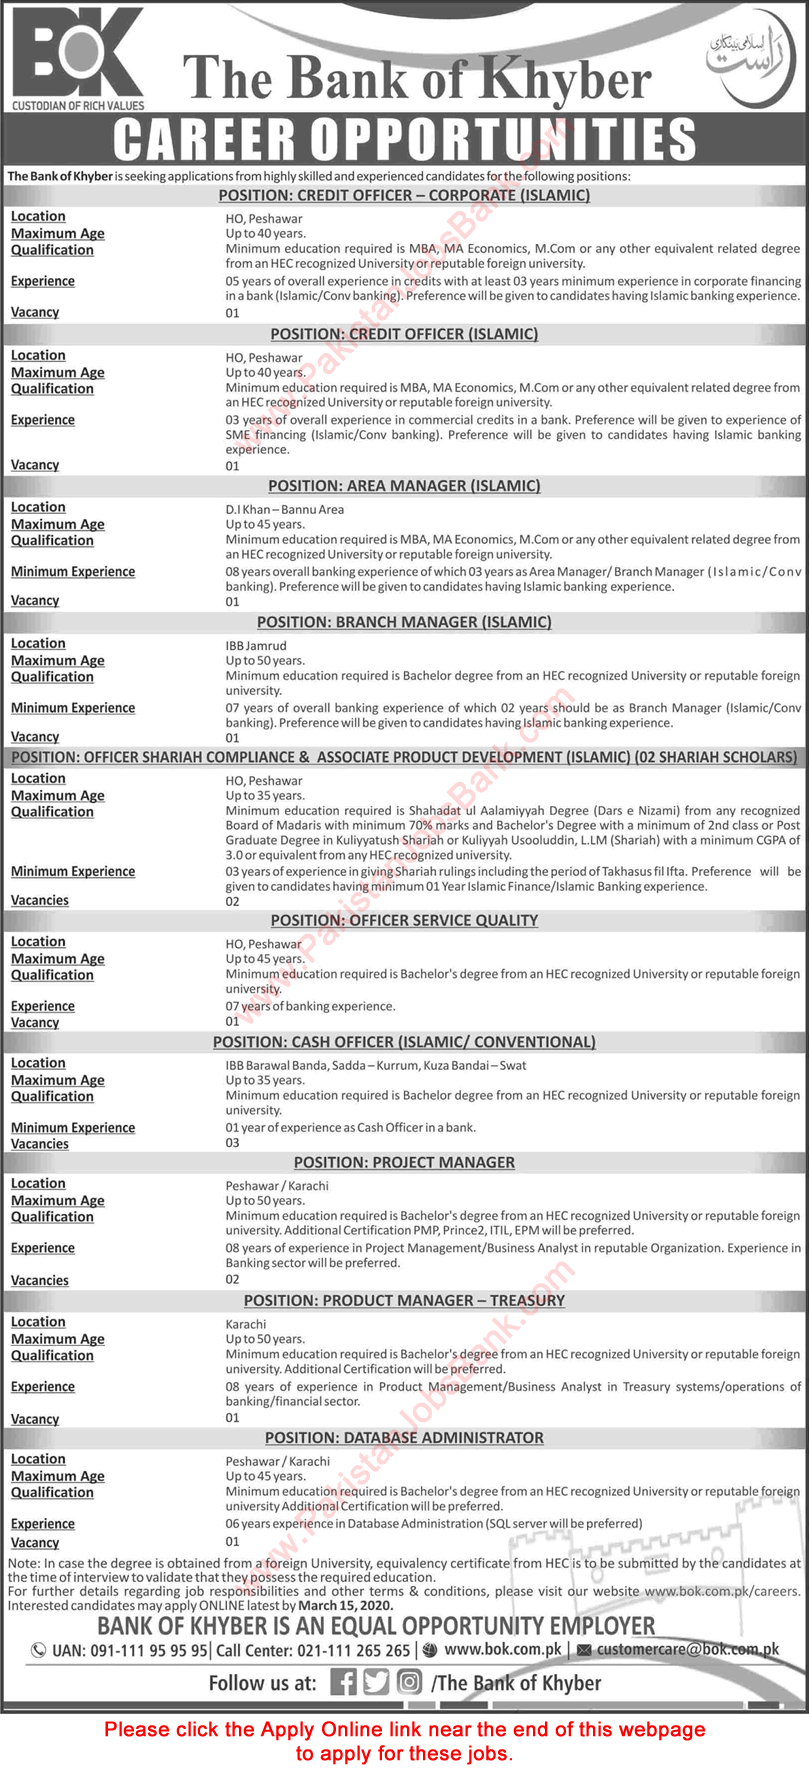 Bank of Khyber Jobs March 2020 Apply Online Cash Officers, Project Managers & Others BOK Latest